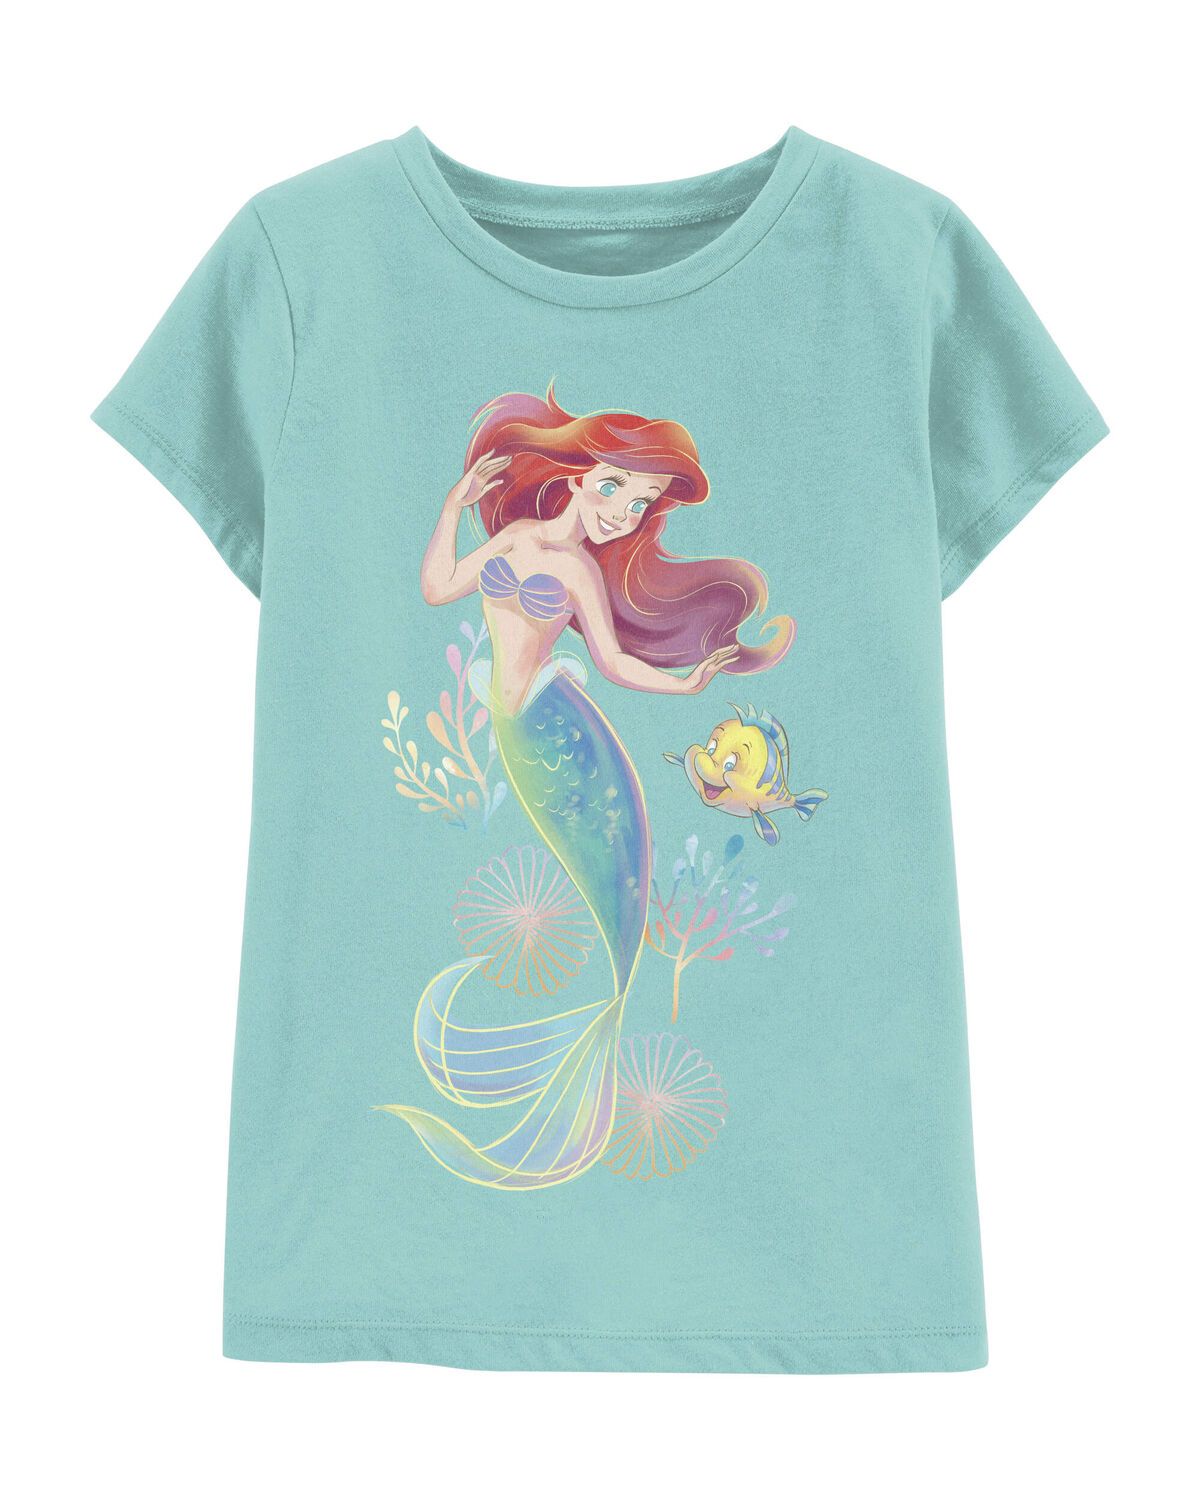 Blue Toddler The Little Mermaid Graphic Tee | carters.com | Carter's